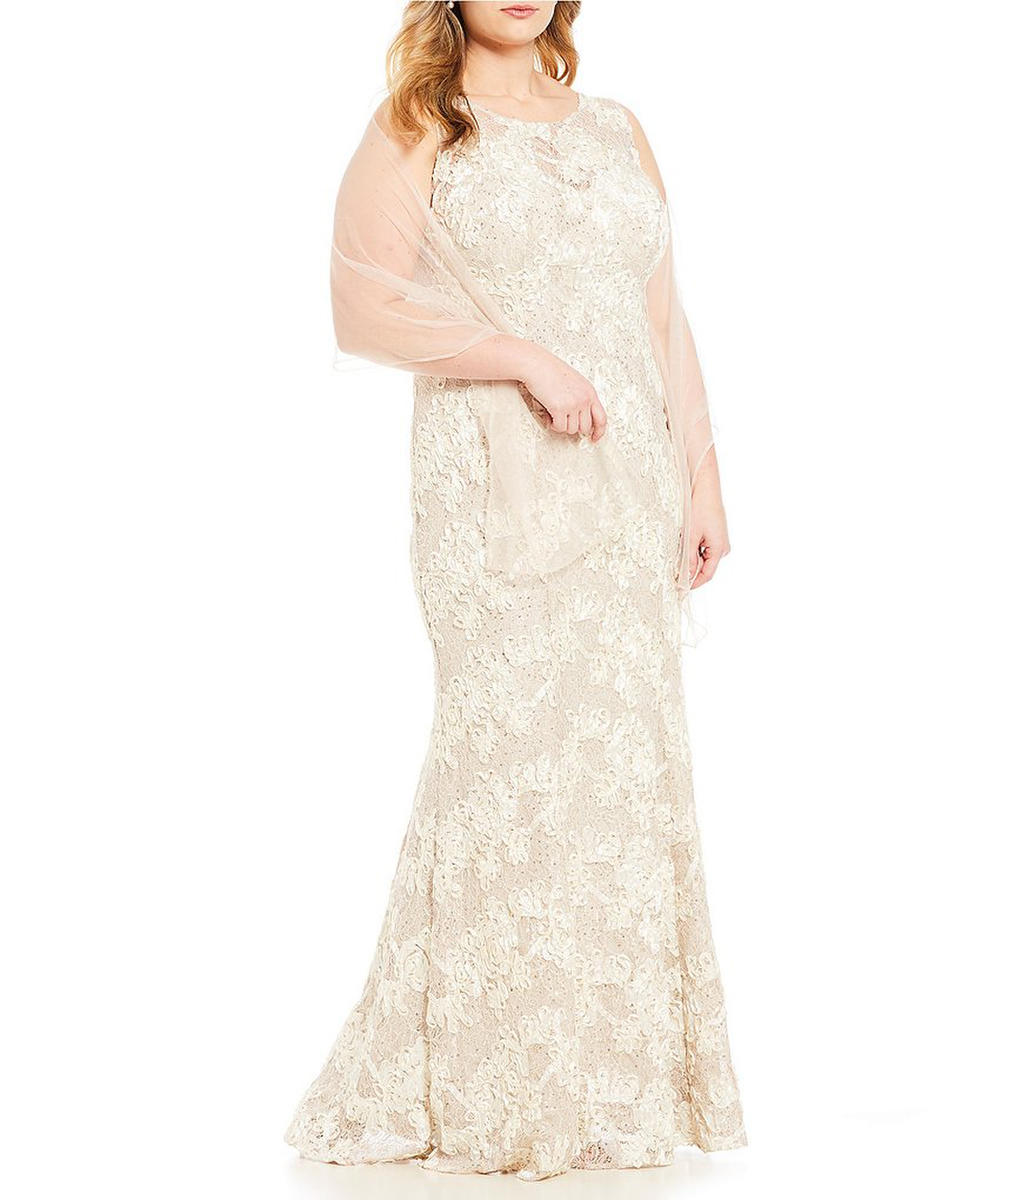 IGNITE EVENINGS - Soutache Lace Gown - Shawl IG619103